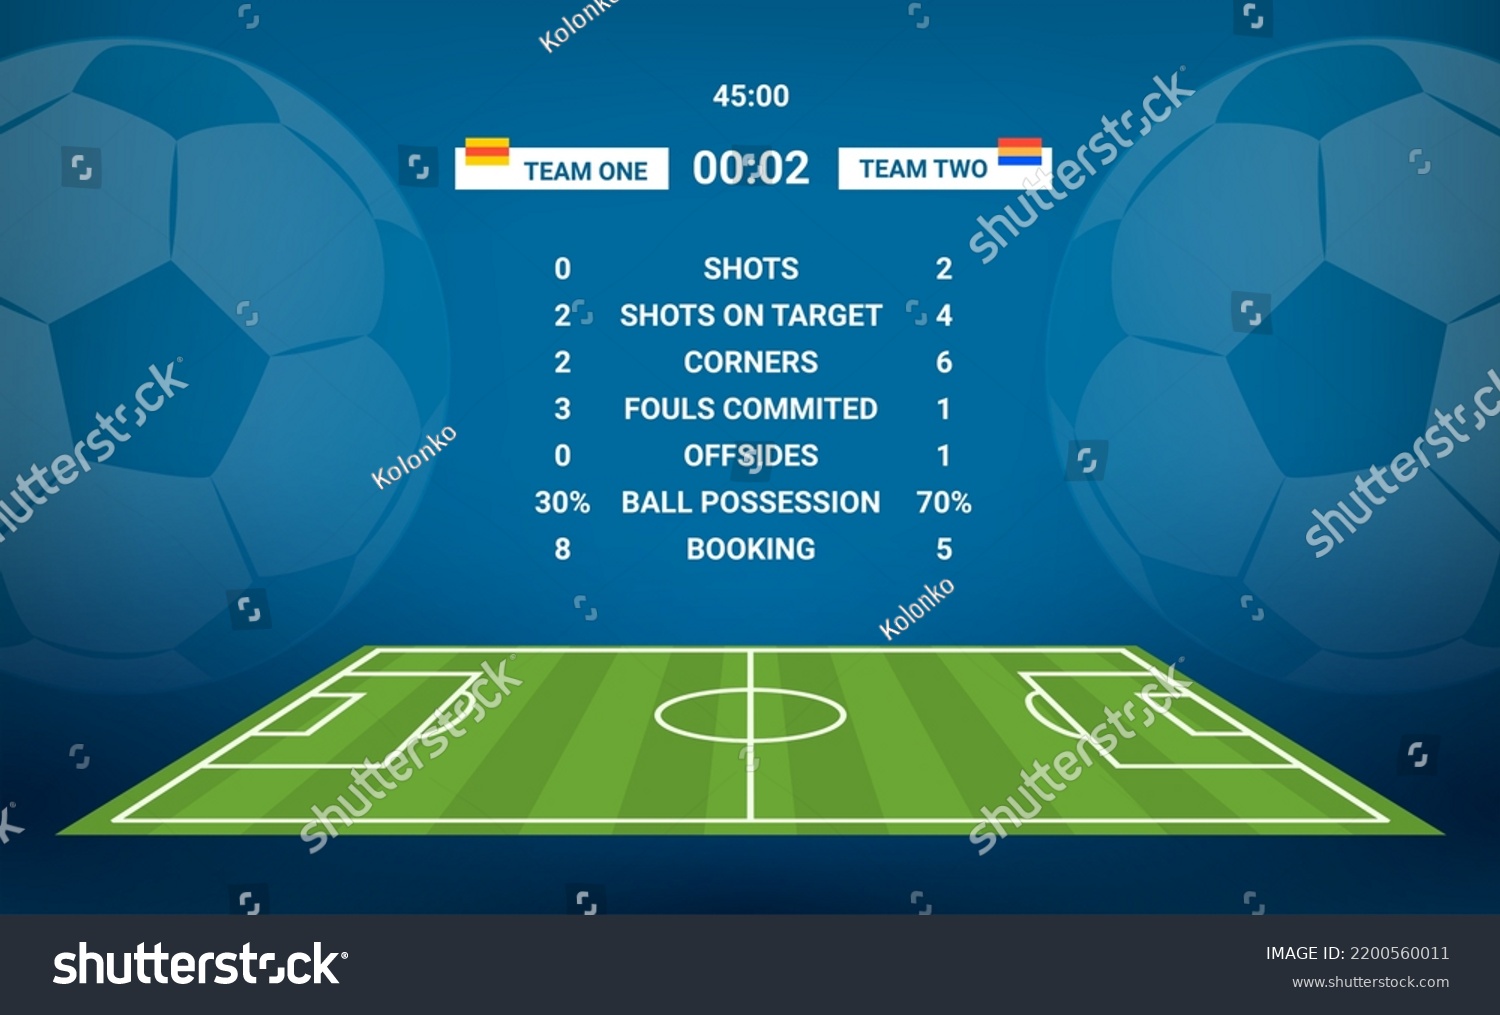 soccer-score-board-card-stats-template-stock-vector-royalty-free